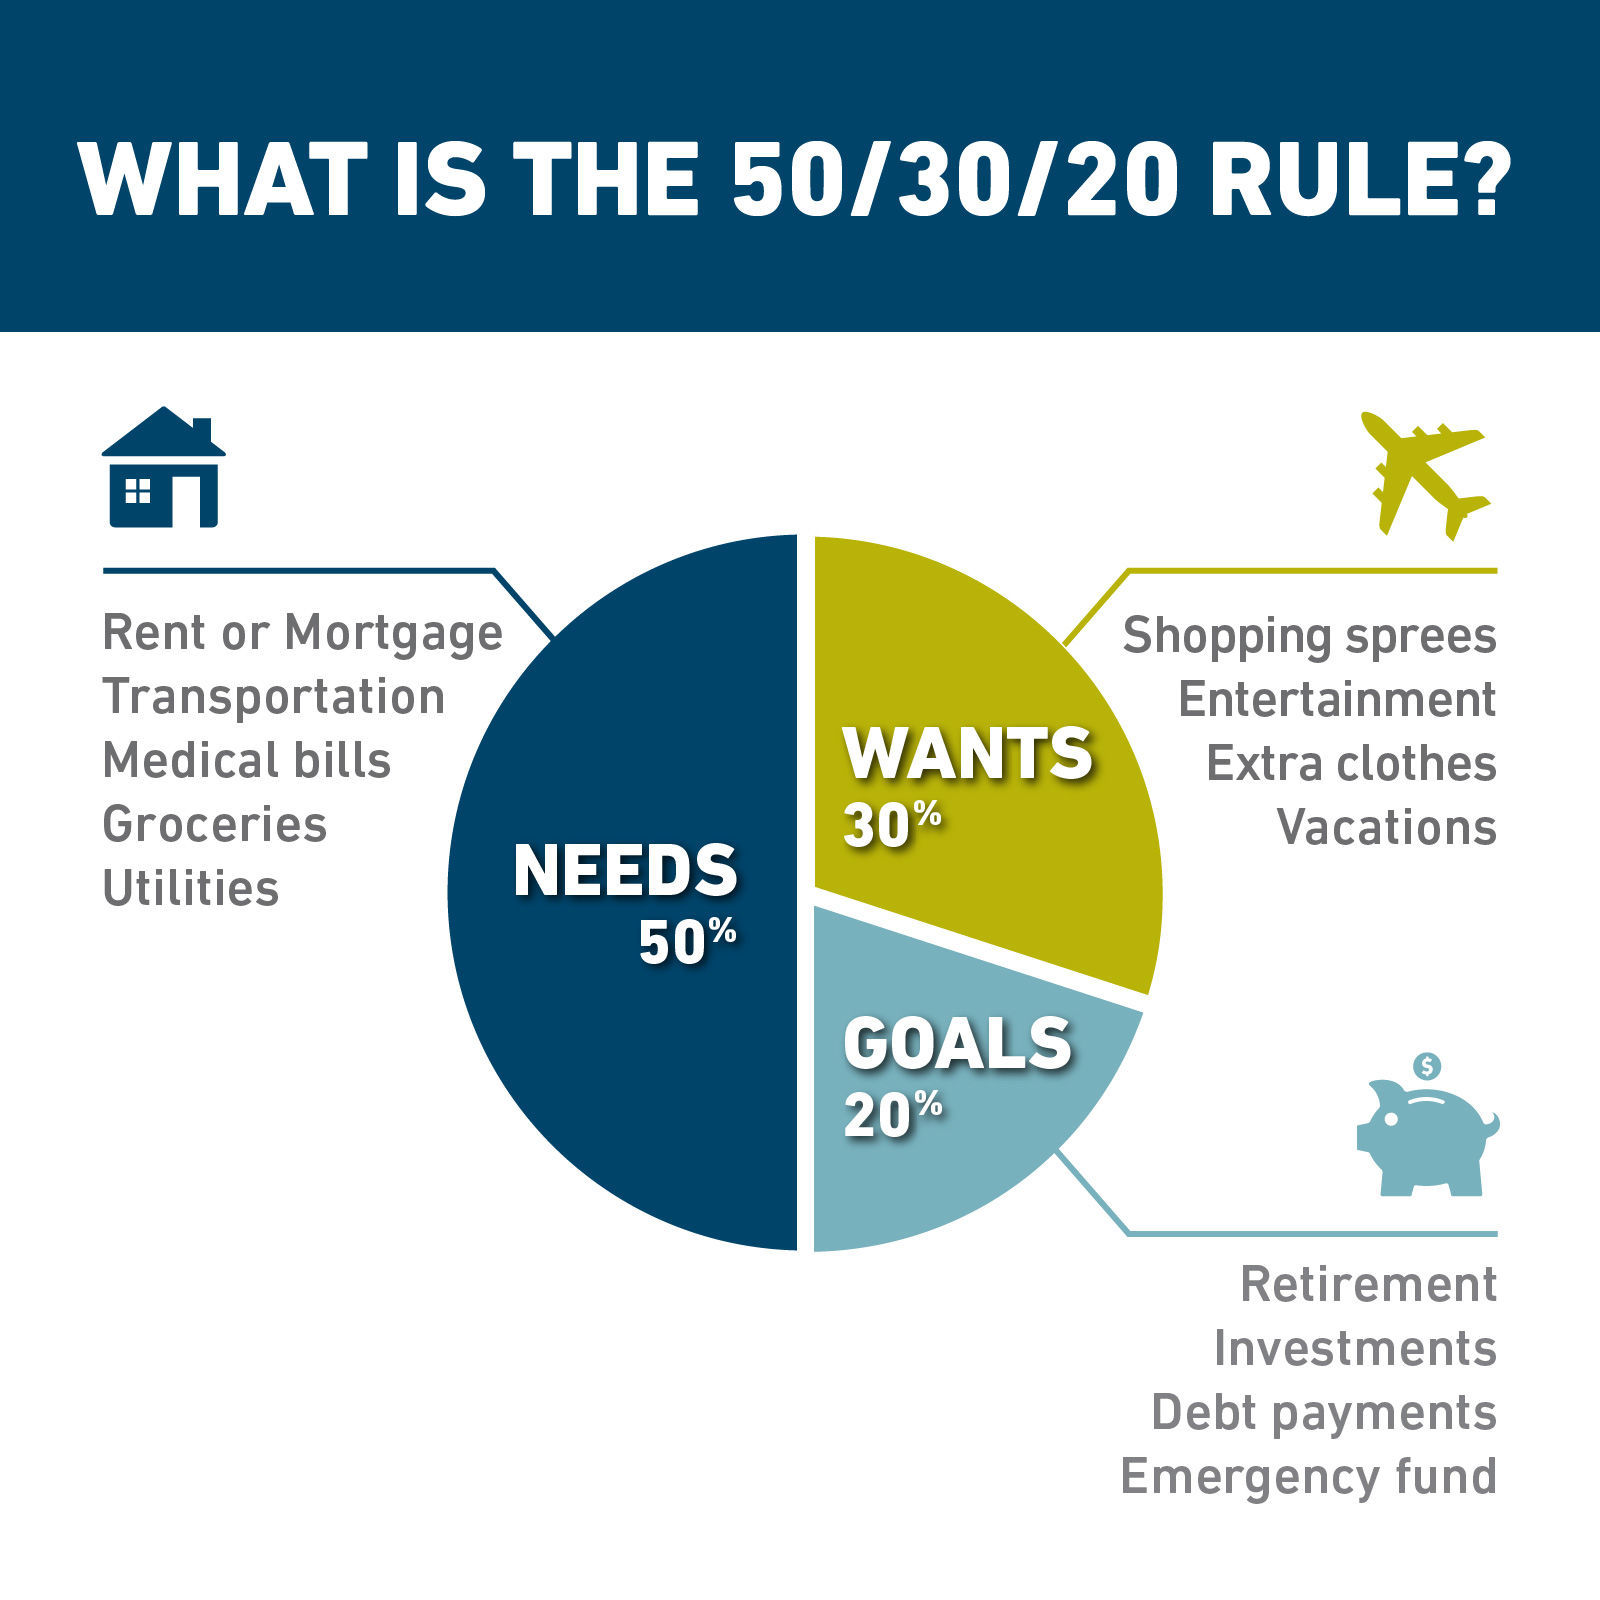 What is the 50/30/20 rule? Allocating 50% to needs, 30% to wants and 20% to goals.